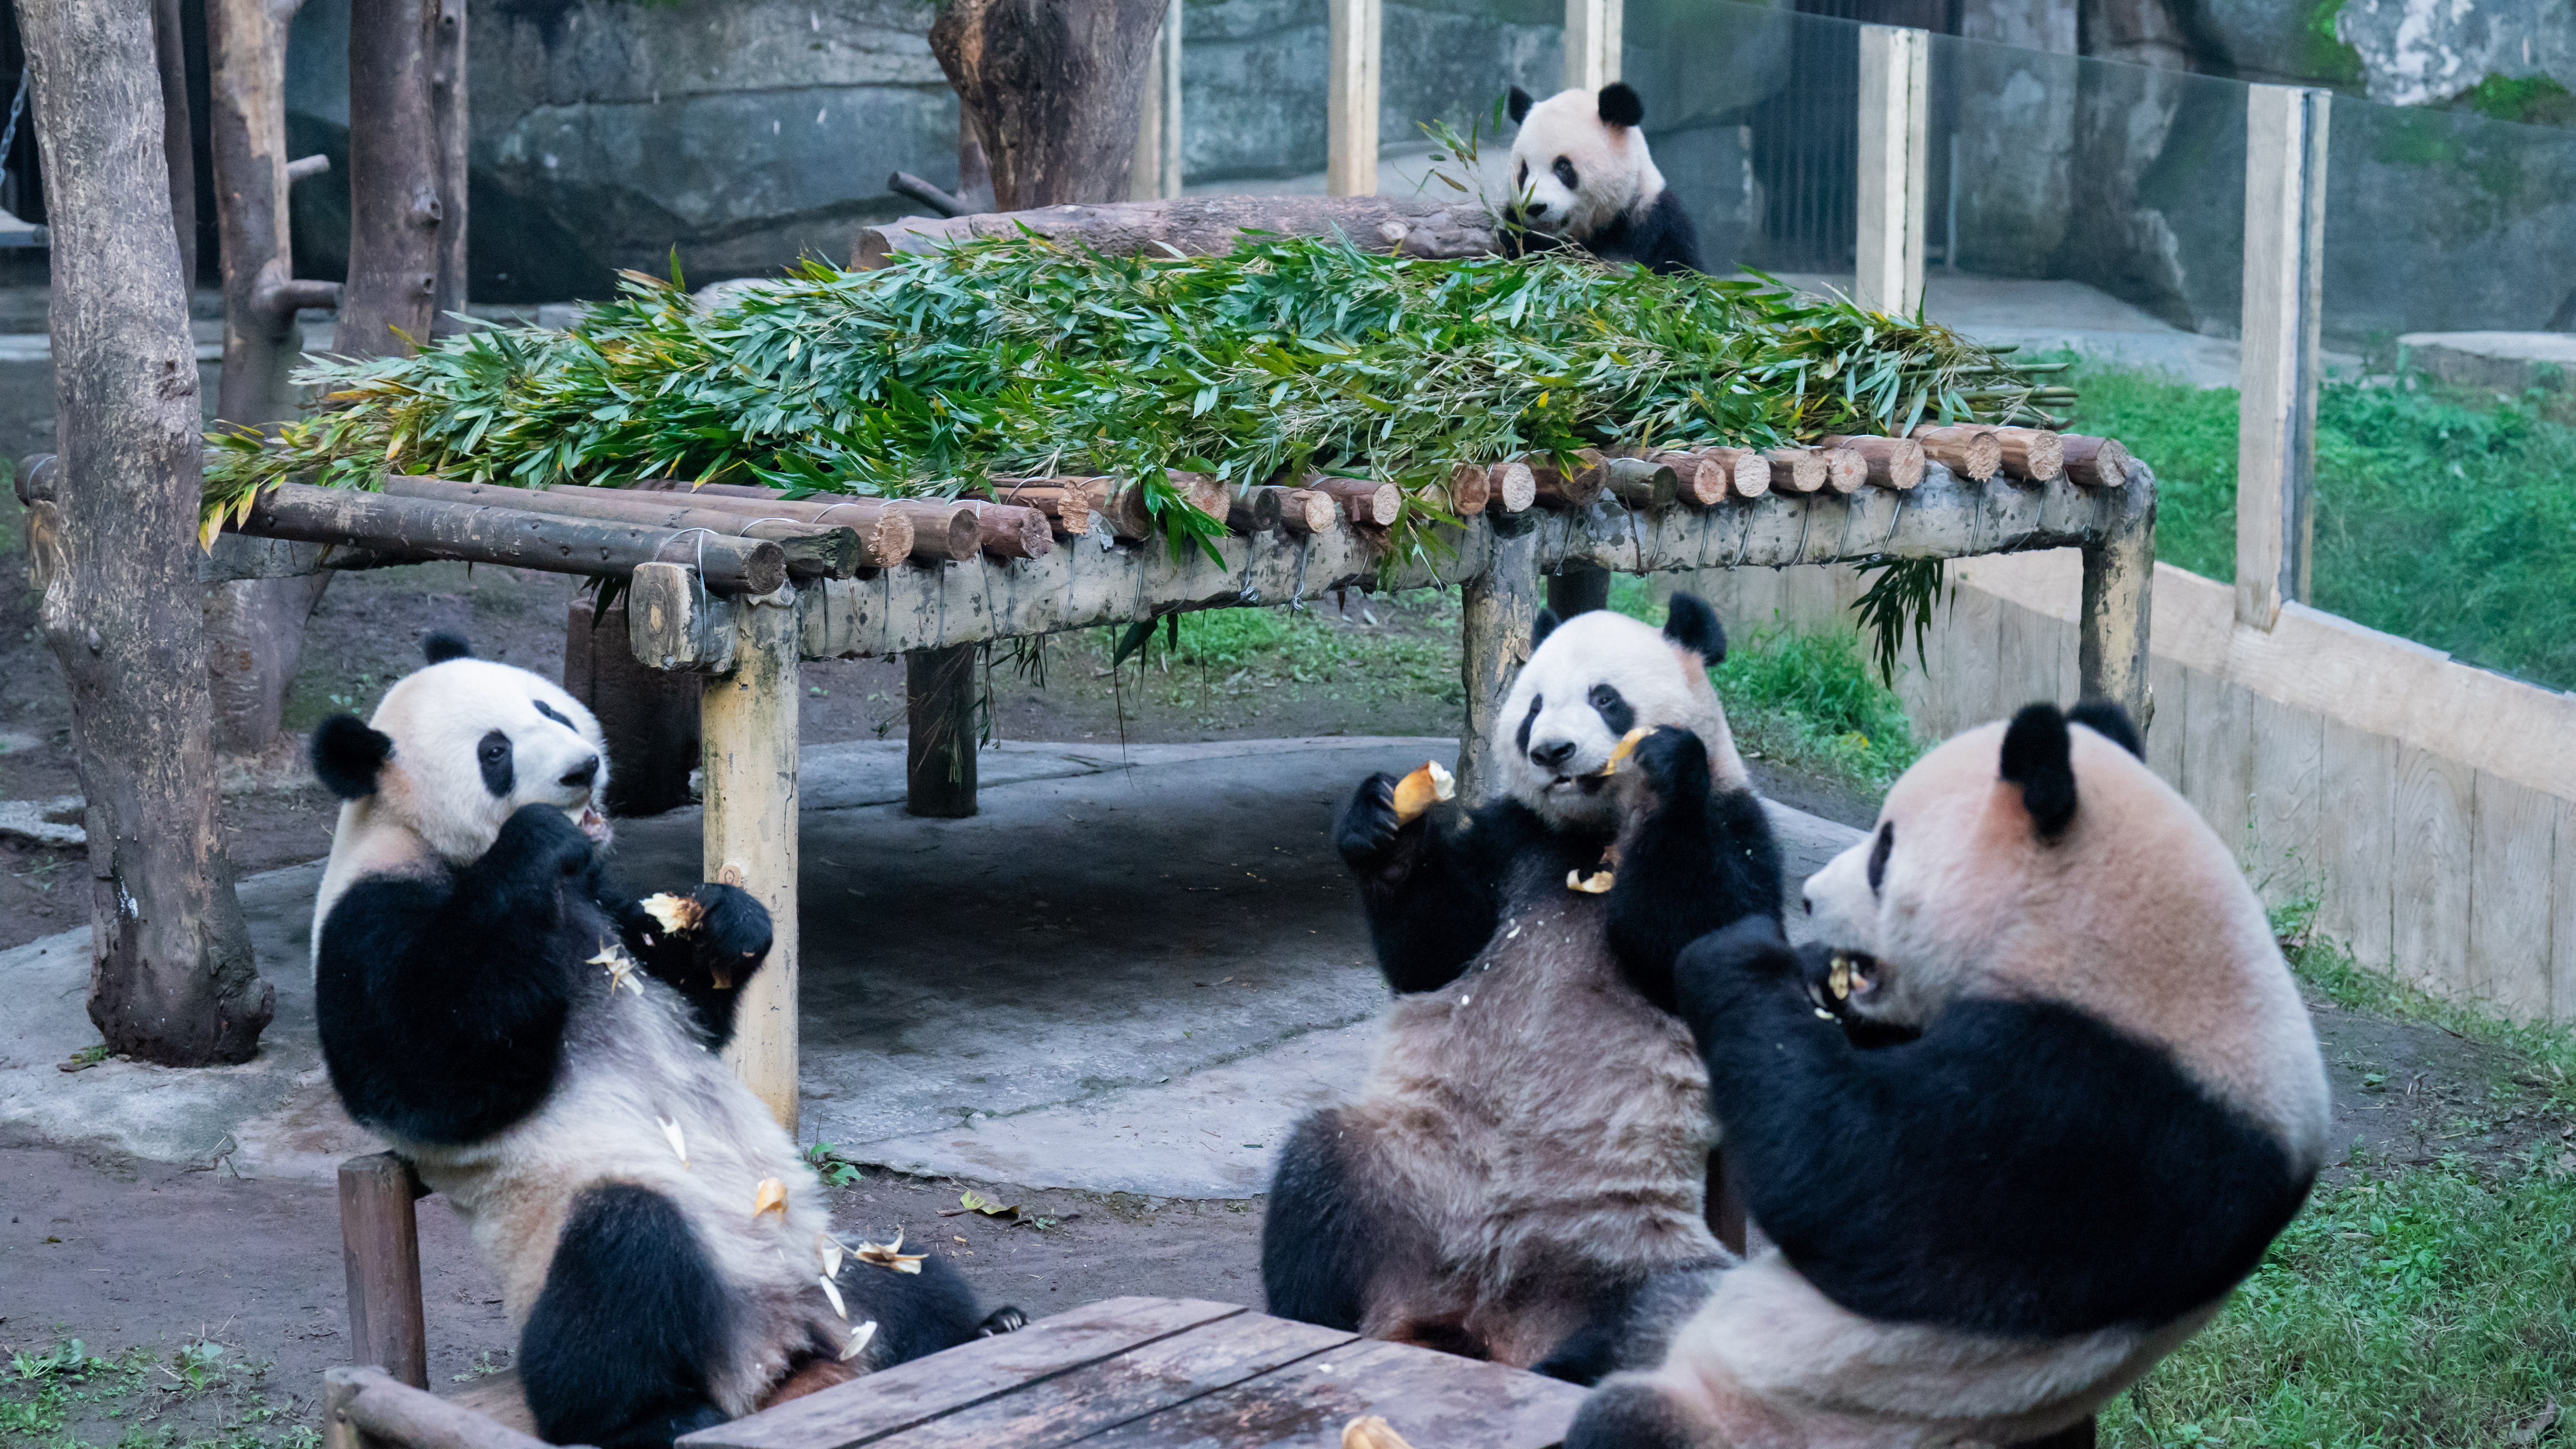 Some believed that the cutely posed pandas were real.